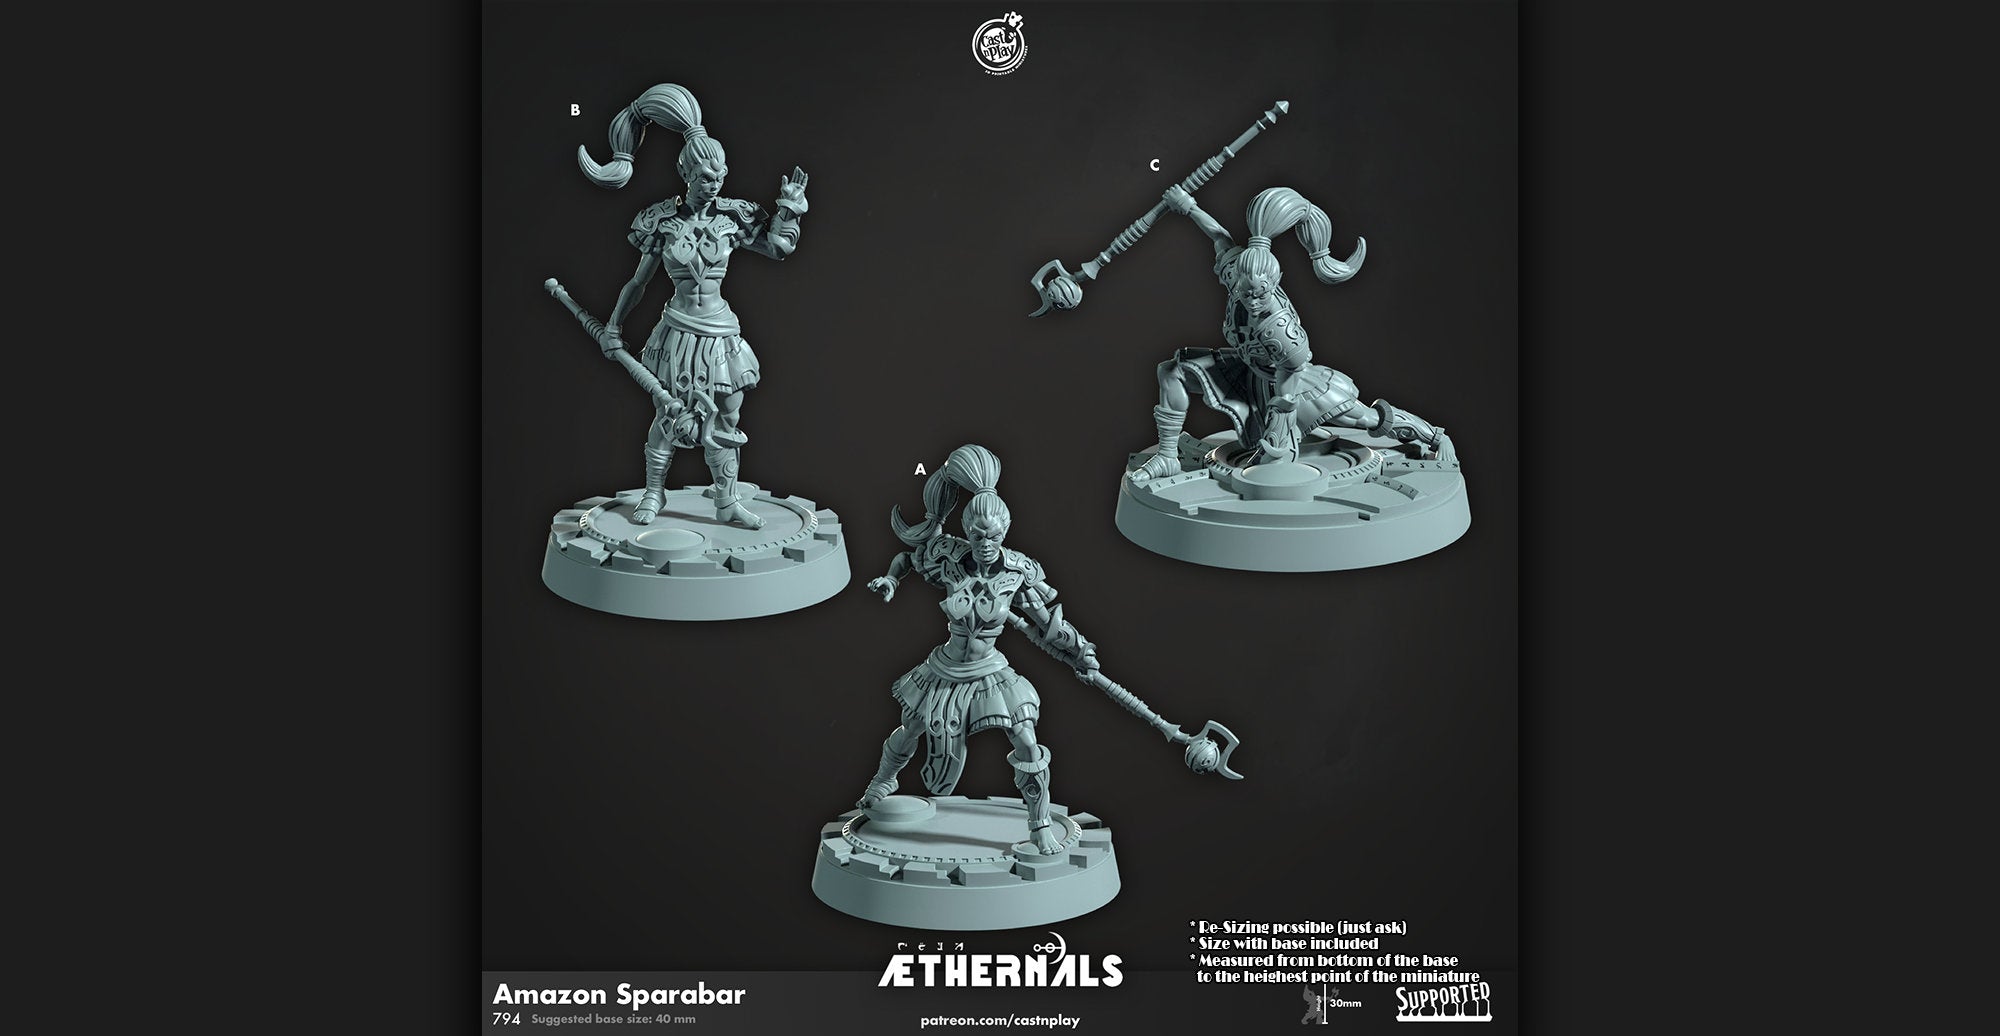 AETHERNALS "Amazon Sparabar" | DnD 12K | Wargaming | Dungeons and Dragons | Pathfinder | Tabletop | RPG | Scifi | 28-32 mm-Role Playing Miniatures